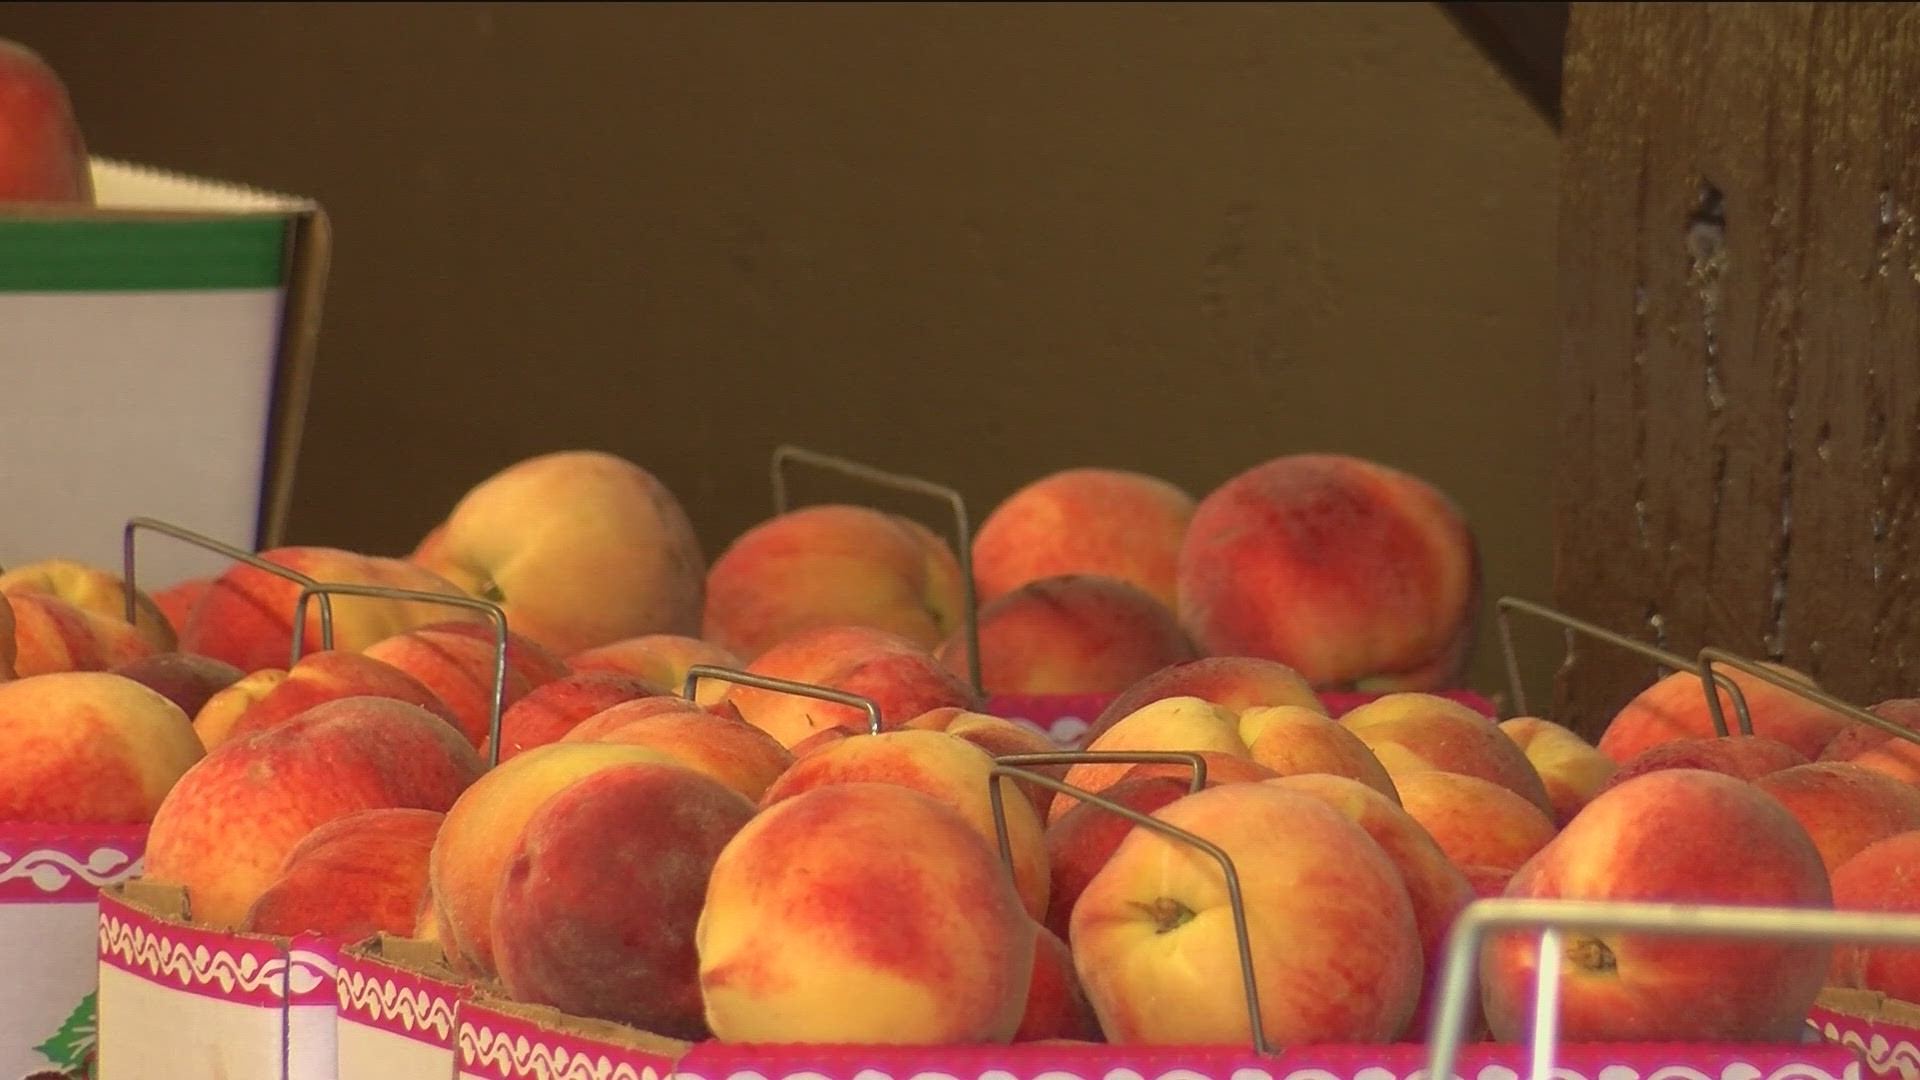 Farms in northwest Ohio have opted out of selling peaches because they are costly to produce.